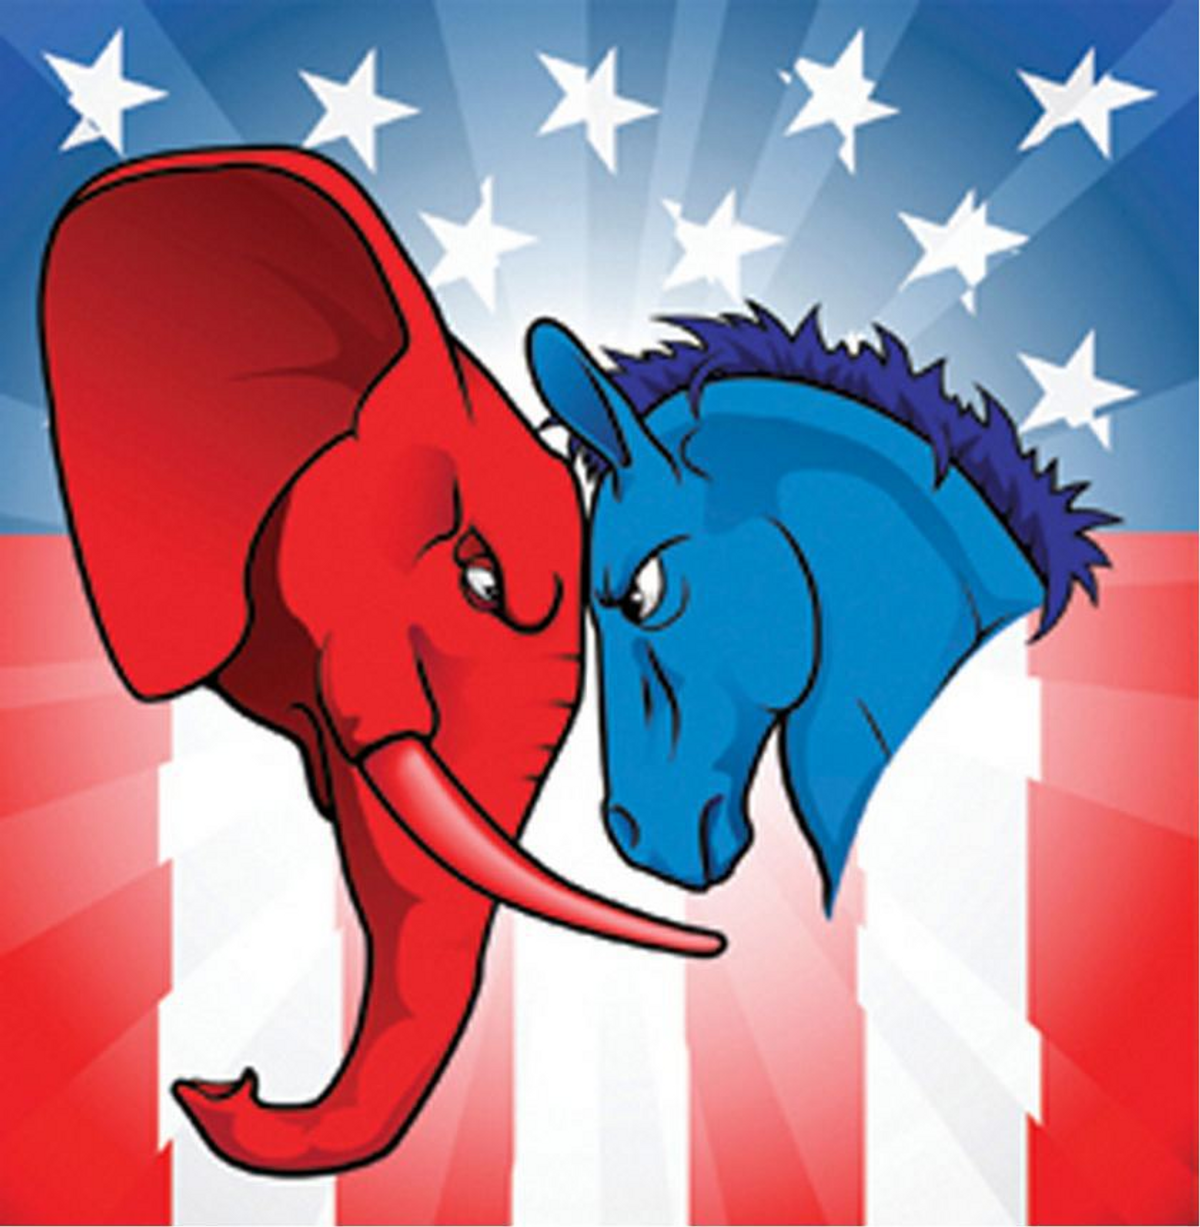 How The Two-Party System Has Failed The United States